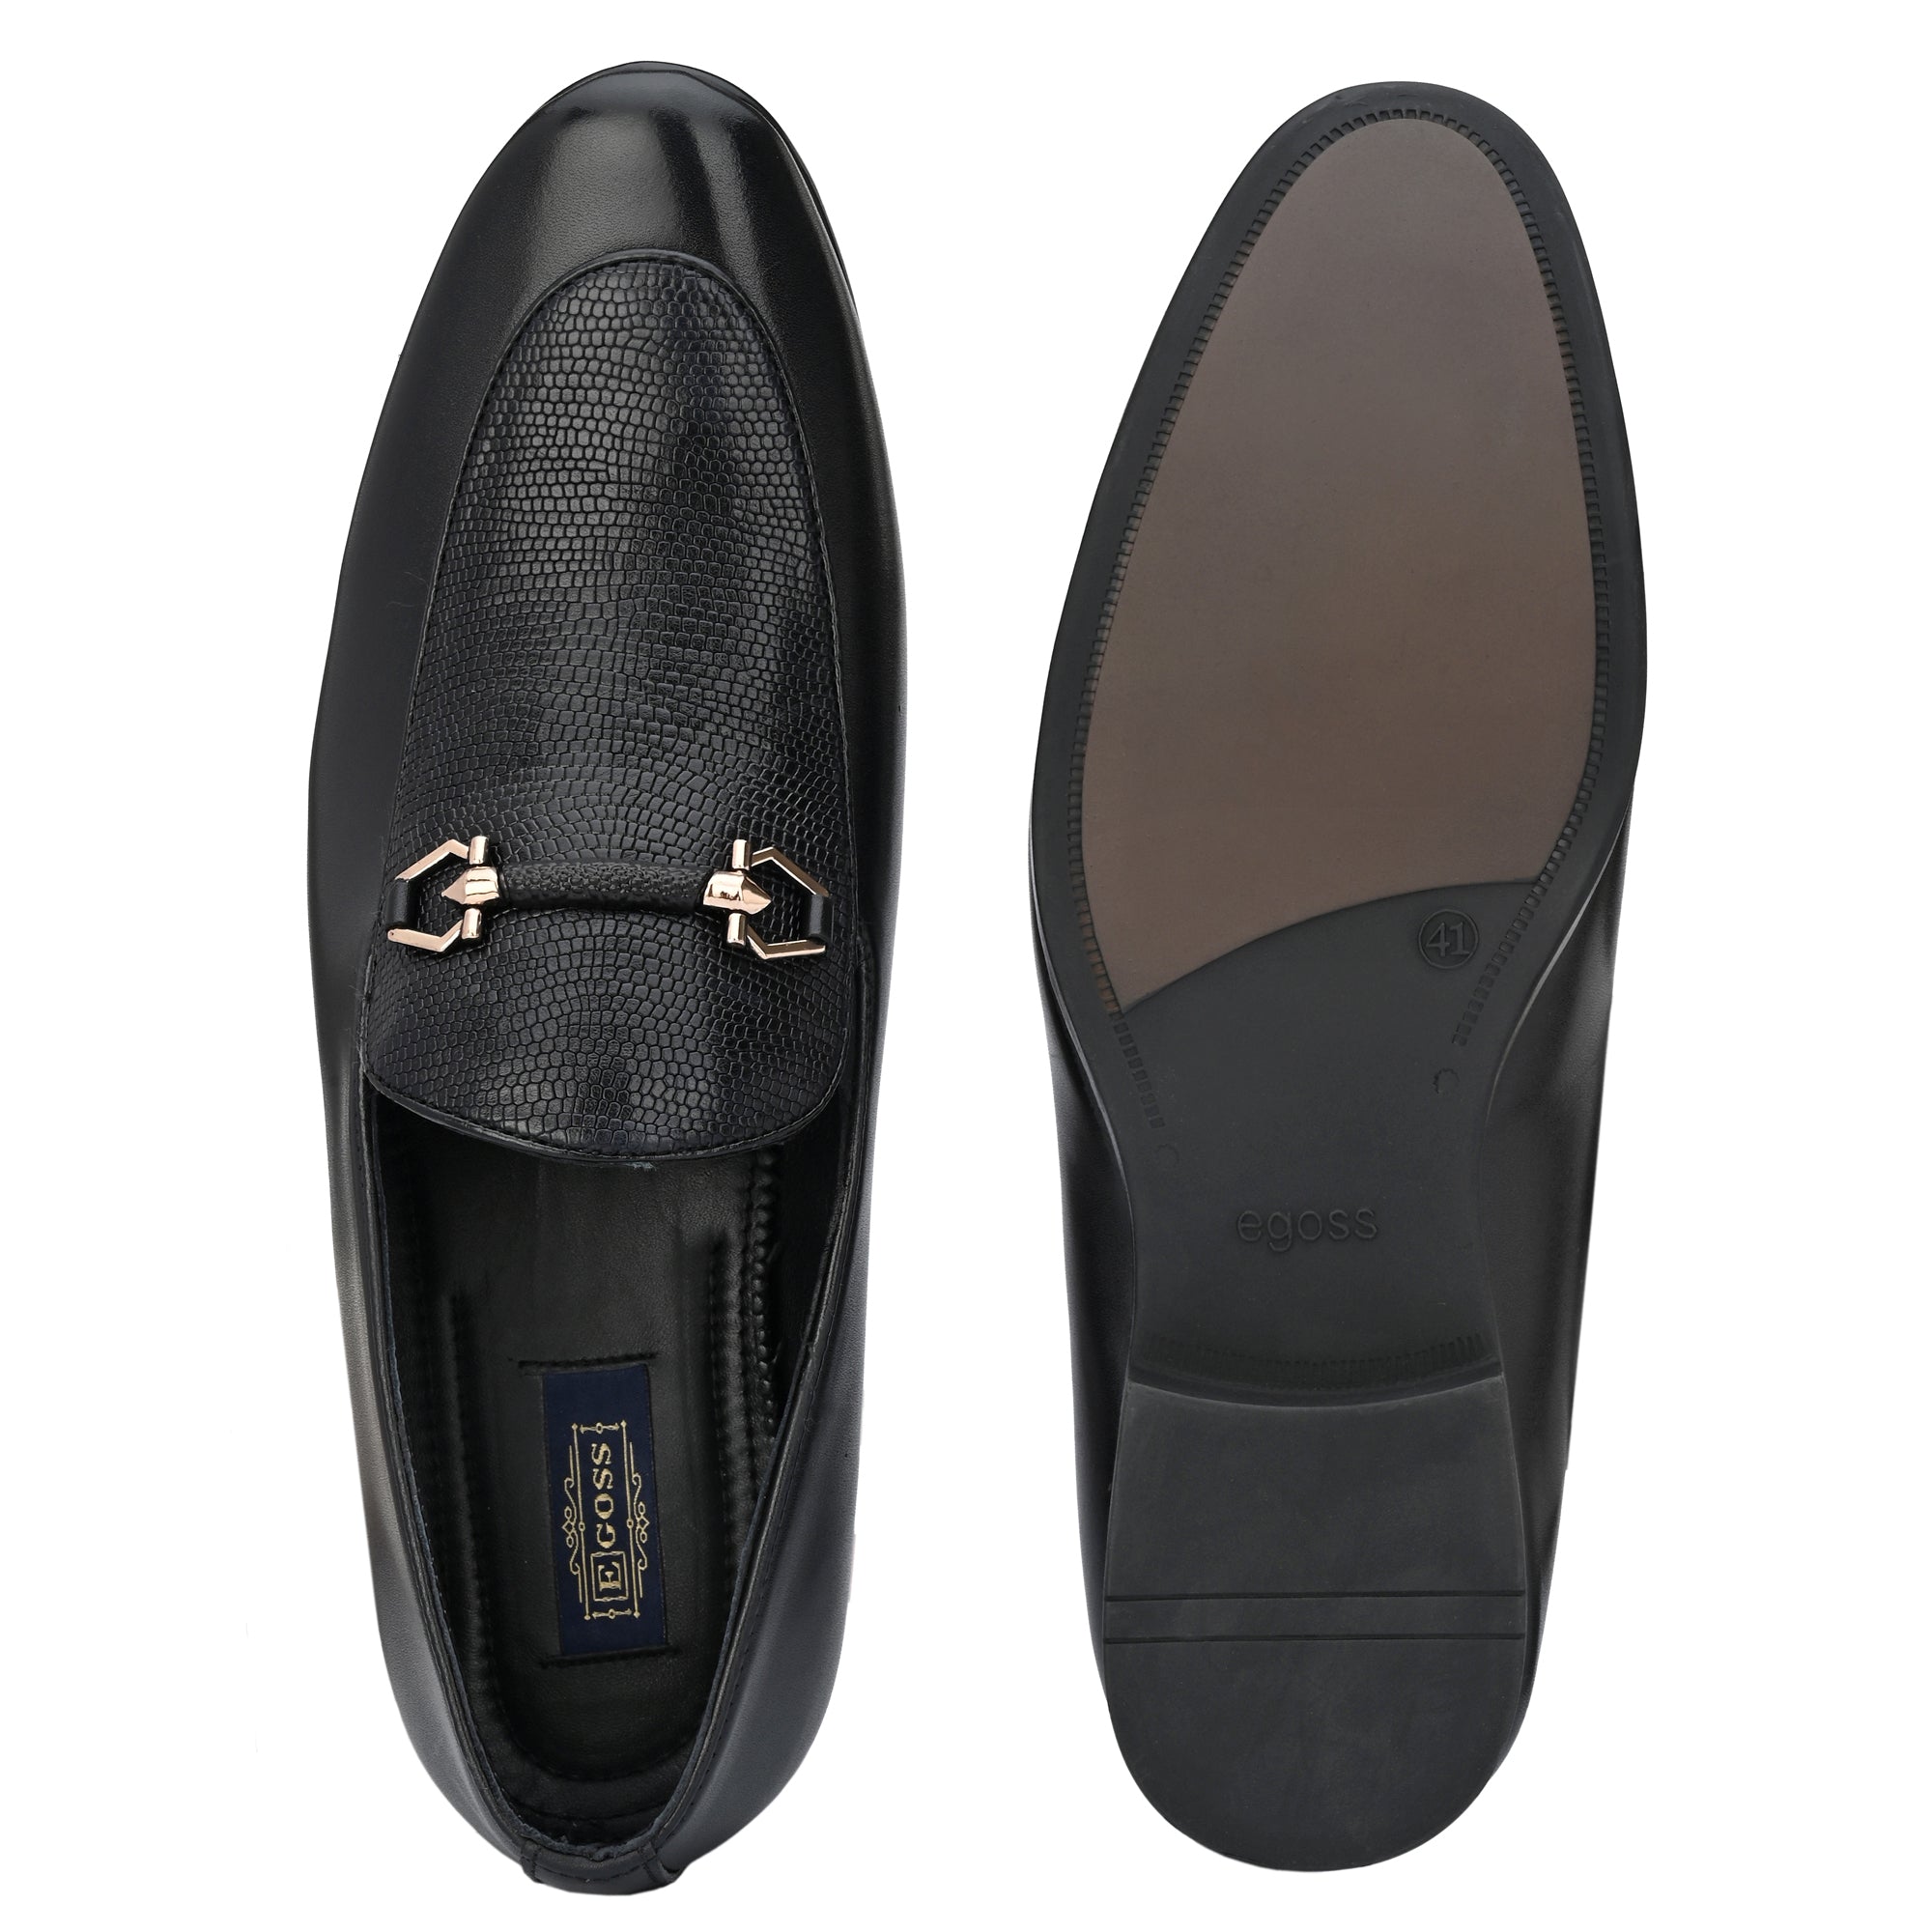 Buckle Formal Shoes